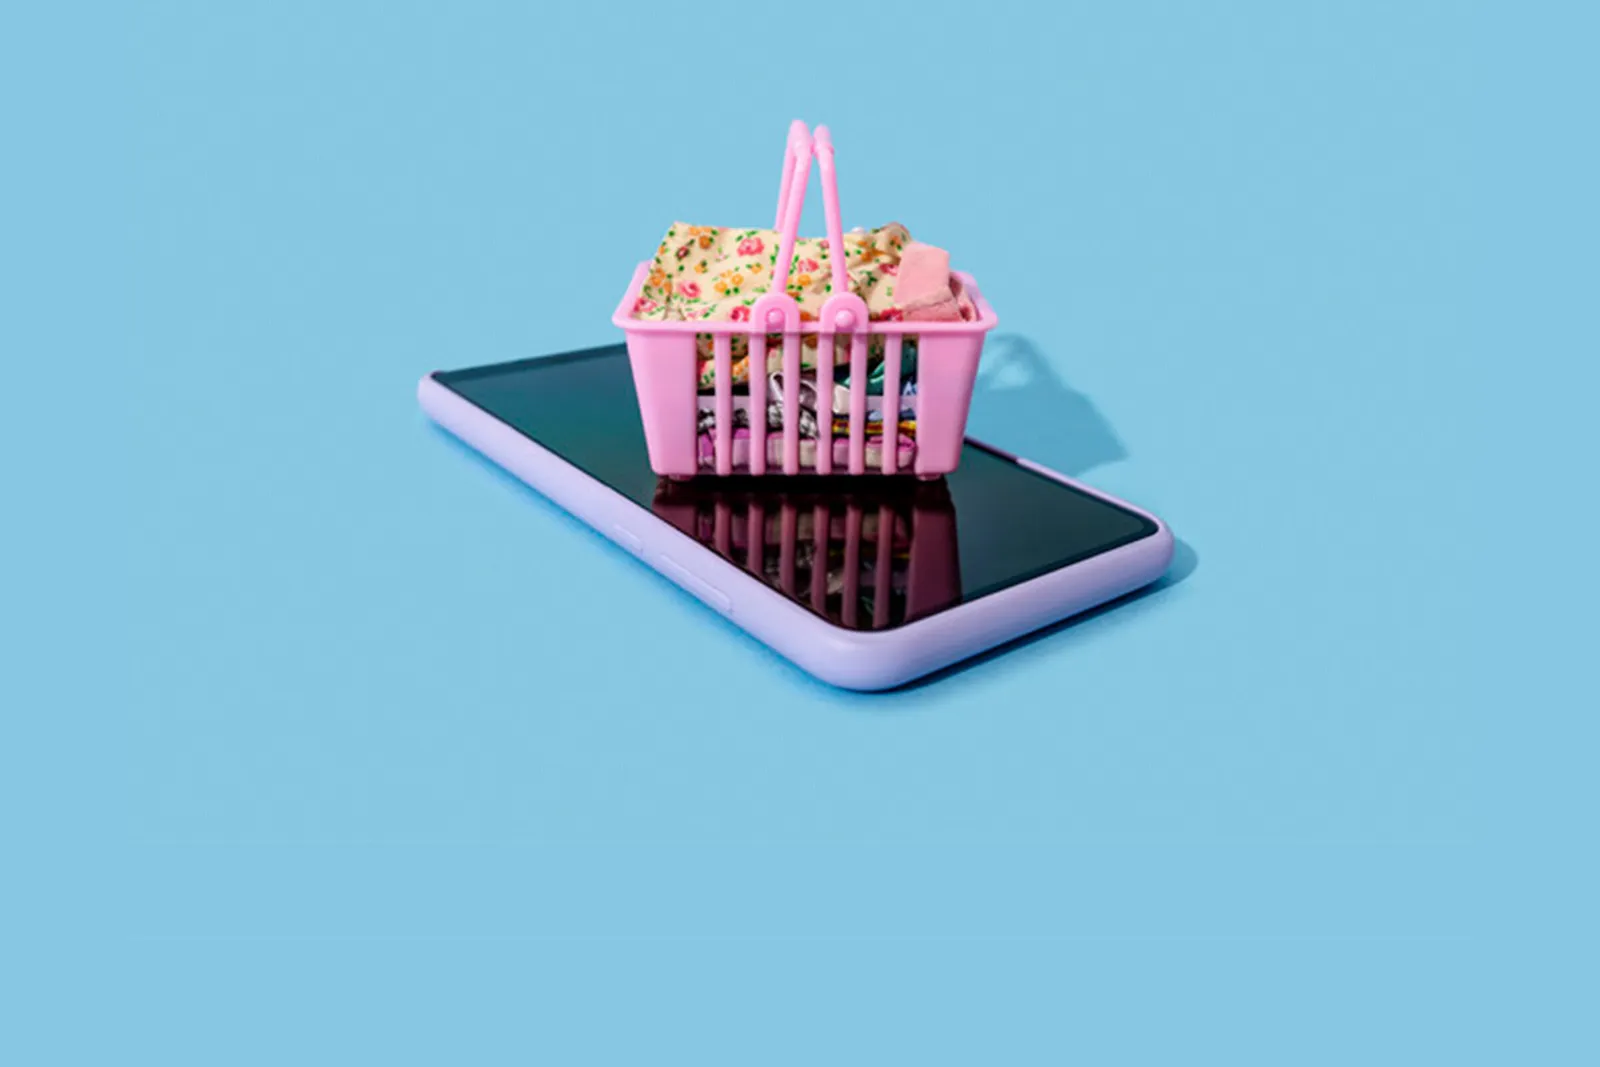 a small shopping basket on top of a mobile phone